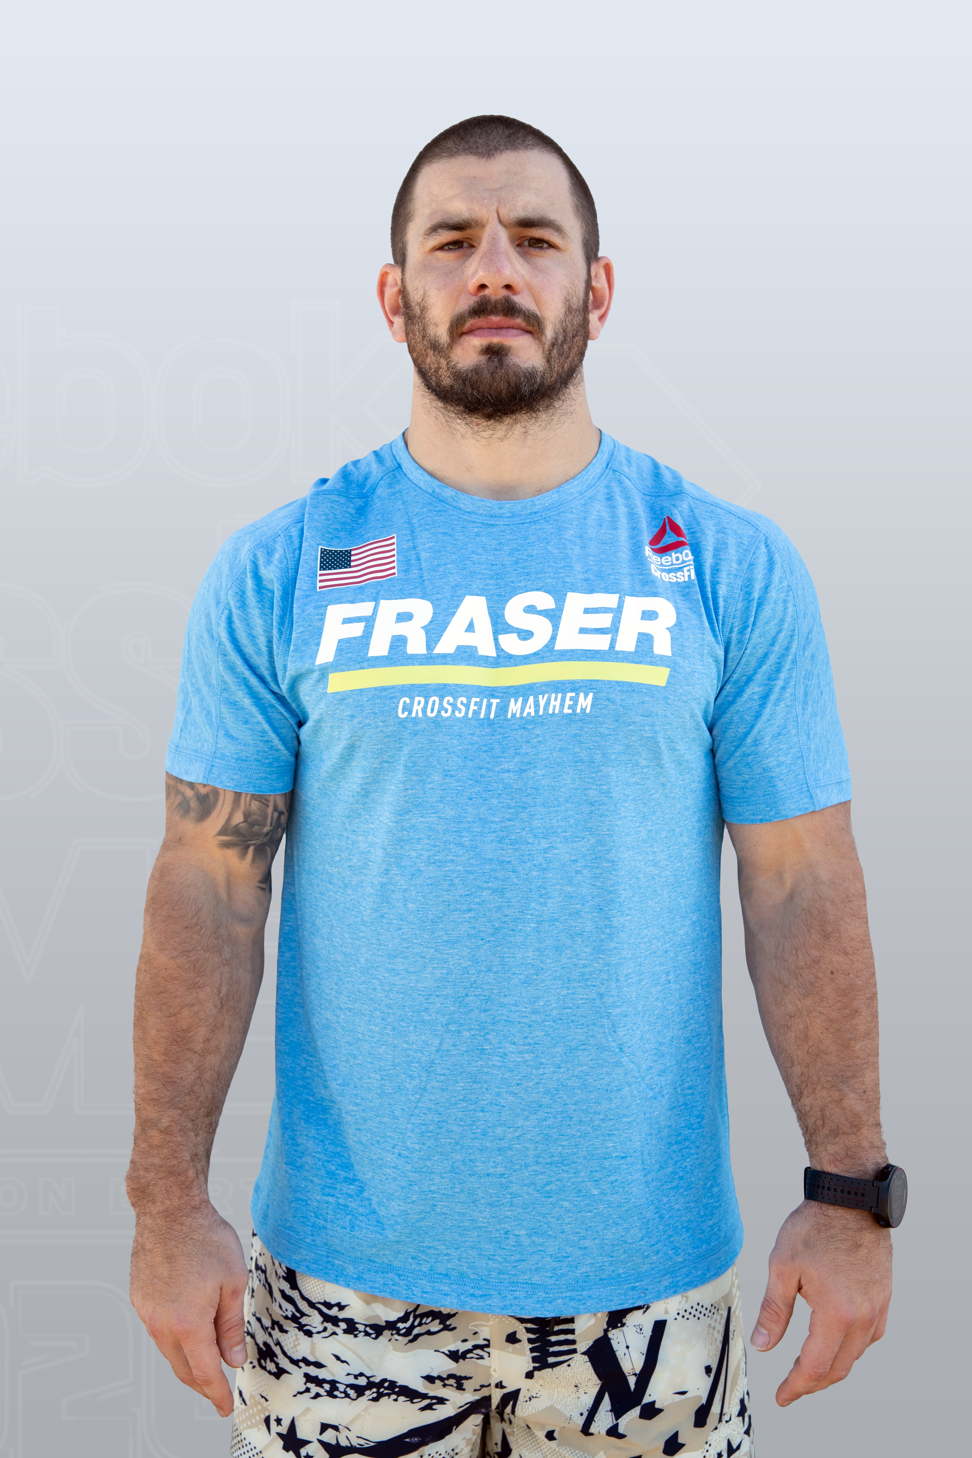 Mat Fraser, four-time ‘Fittest on Earth’, going for another title.